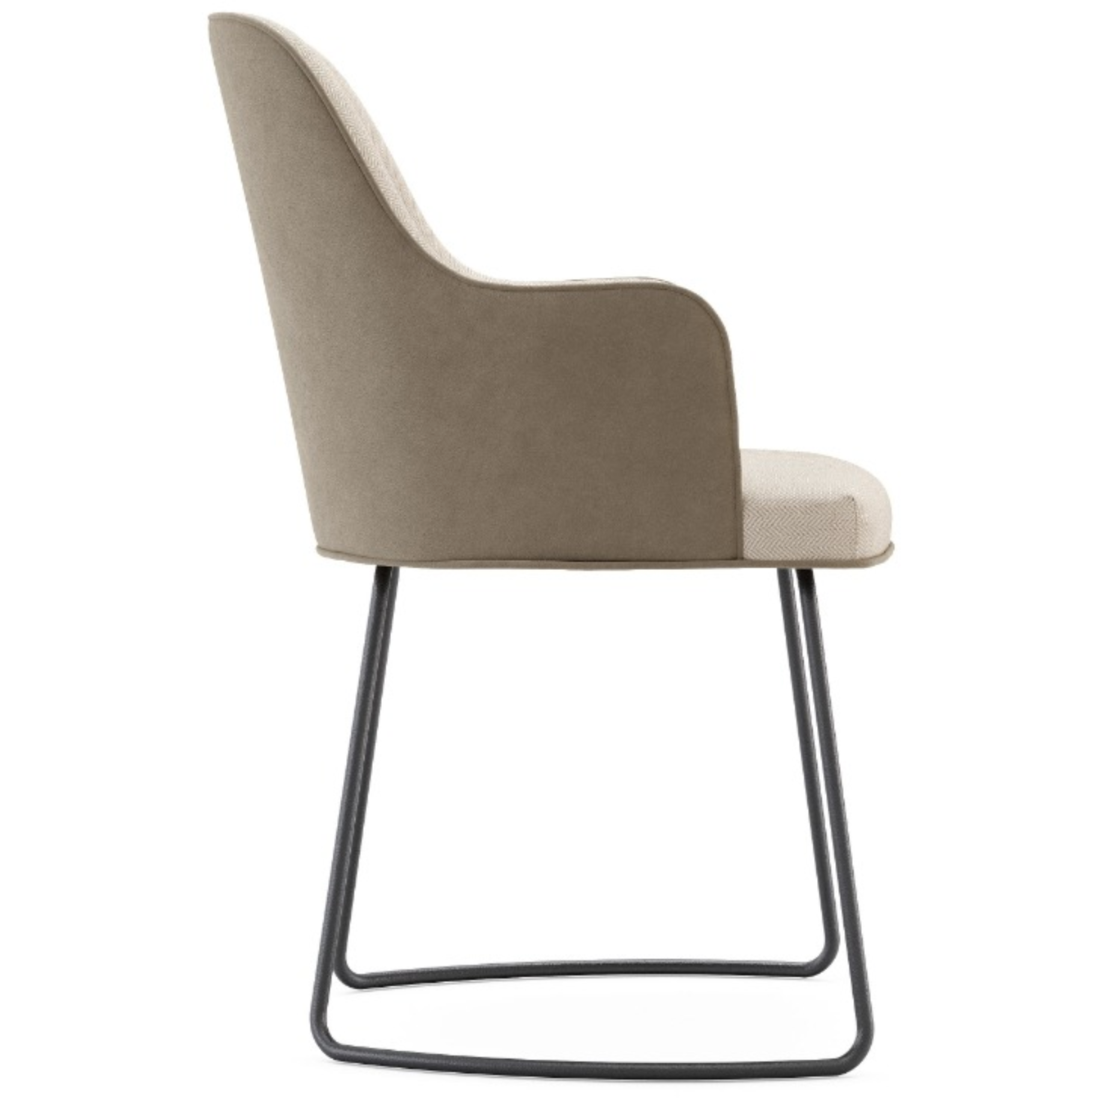 Domkapa Anna Chair with Armrests & Metal Sled Baseboard - A Pair - Customisable | Modern Furniture + Decor